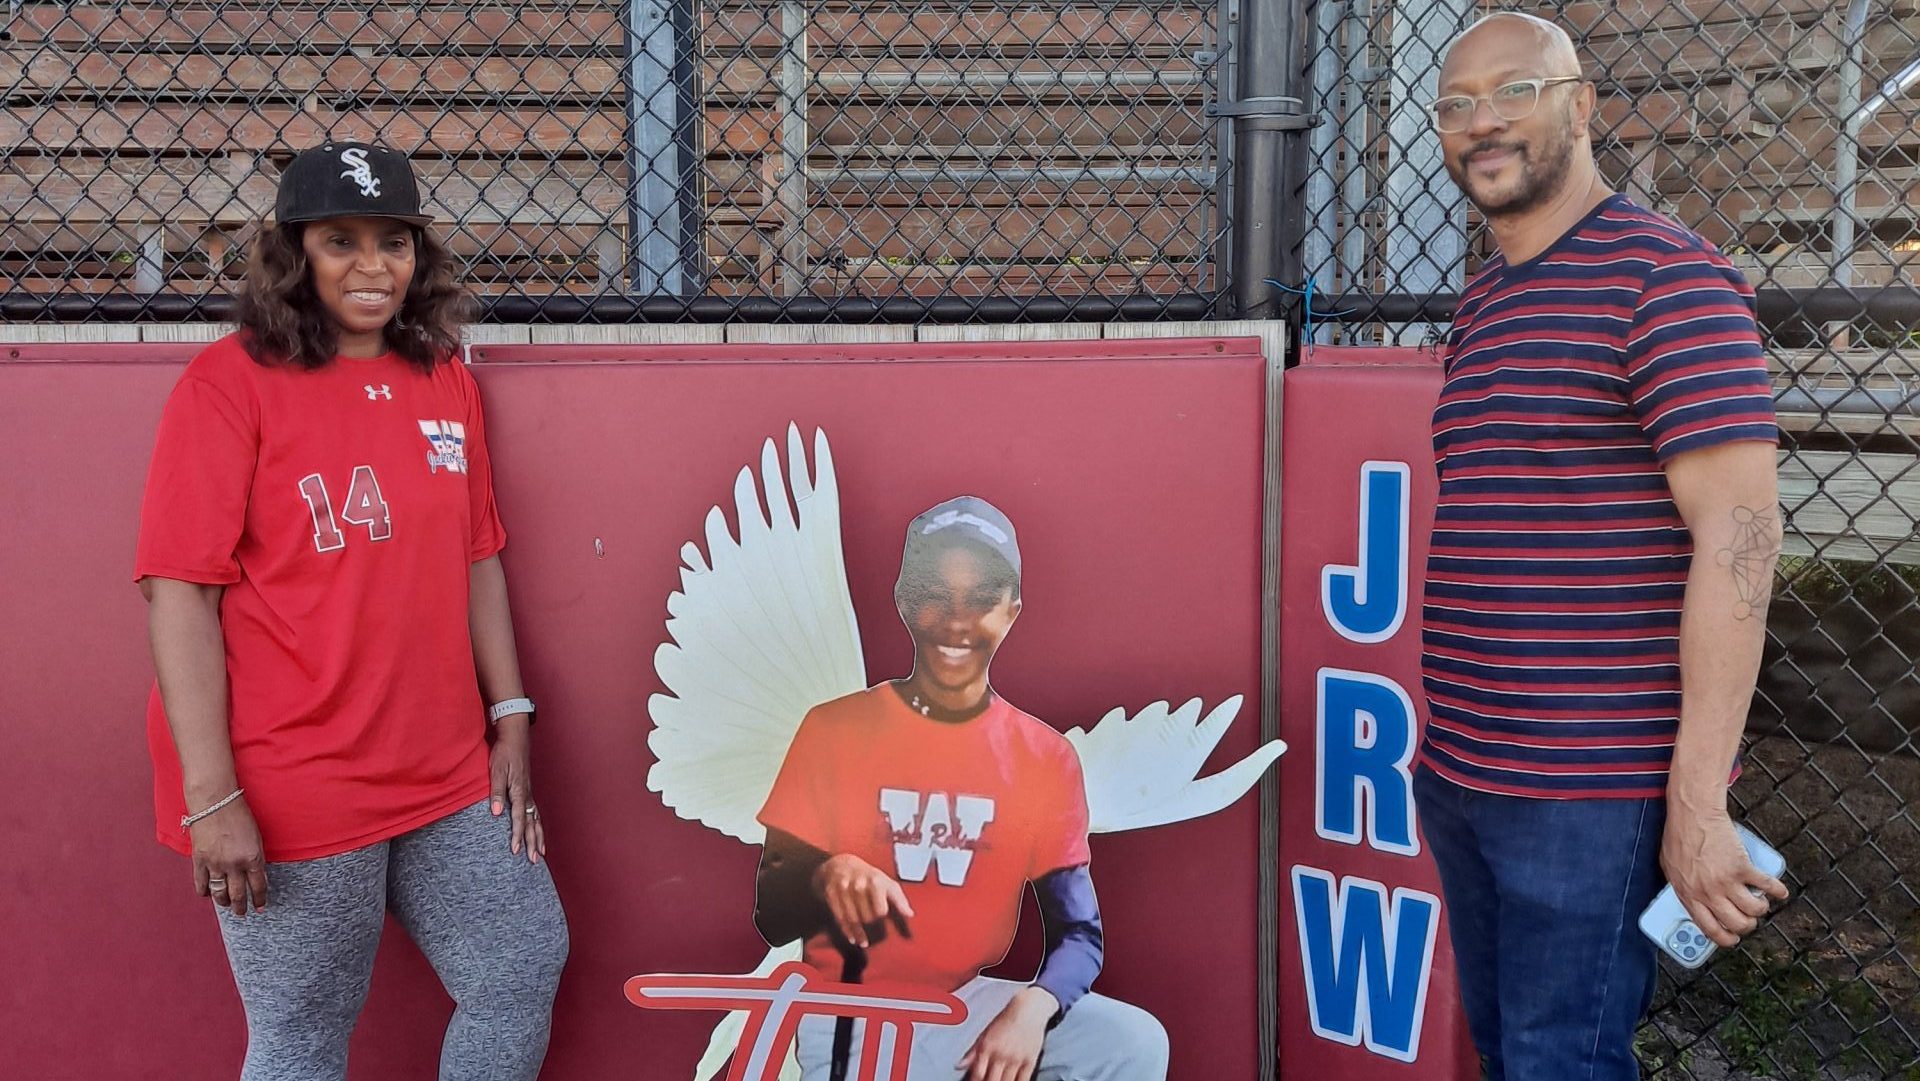 Melanie White (left) and Darren Pollard with a cutout picture of their son at a baseball field in Chicago.